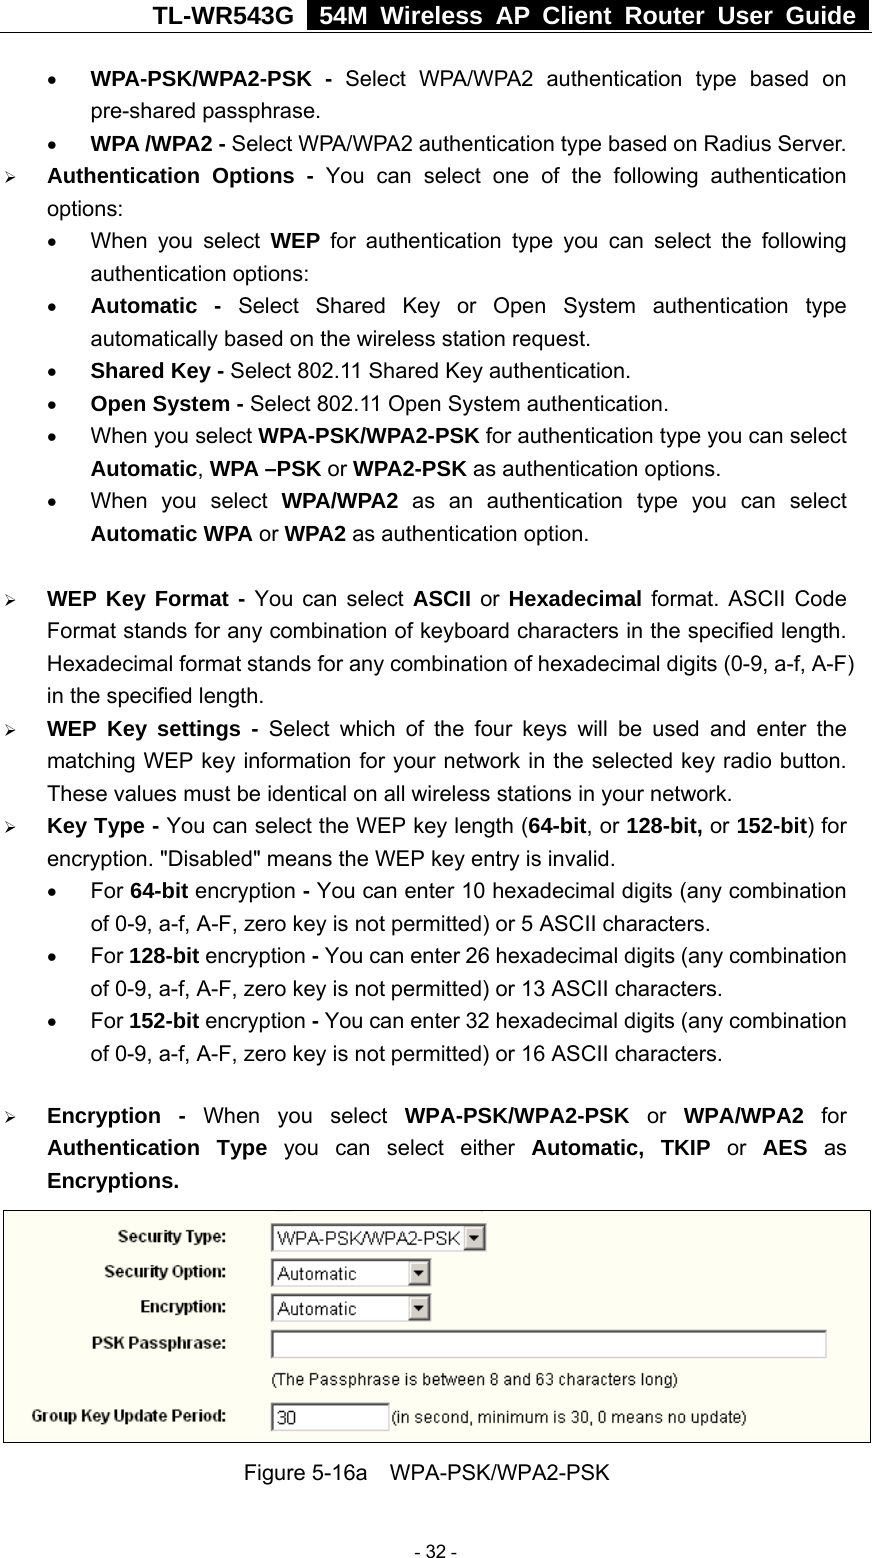 TL-WR543G   54M Wireless AP Client Router User Guide  • WPA-PSK/WPA2-PSK - Select WPA/WPA2 authentication type based on pre-shared passphrase.   • WPA /WPA2 - Select WPA/WPA2 authentication type based on Radius Server. ¾ Authentication Options - You can select one of the following authentication options:  • When you select WEP for authentication type you can select the following authentication options: • Automatic - Select Shared Key or Open System authentication type automatically based on the wireless station request. • Shared Key - Select 802.11 Shared Key authentication. • Open System - Select 802.11 Open System authentication. • When you select WPA-PSK/WPA2-PSK for authentication type you can select Automatic, WPA –PSK or WPA2-PSK as authentication options. • When you select WPA/WPA2 as an authentication type you can select Automatic WPA or WPA2 as authentication option.  ¾ WEP Key Format - You can select ASCII or  Hexadecimal format. ASCII Code Format stands for any combination of keyboard characters in the specified length. Hexadecimal format stands for any combination of hexadecimal digits (0-9, a-f, A-F) in the specified length. ¾ WEP Key settings - Select which of the four keys will be used and enter the matching WEP key information for your network in the selected key radio button. These values must be identical on all wireless stations in your network. ¾ Key Type - You can select the WEP key length (64-bit, or 128-bit, or 152-bit) for encryption. &quot;Disabled&quot; means the WEP key entry is invalid. • For 64-bit encryption - You can enter 10 hexadecimal digits (any combination of 0-9, a-f, A-F, zero key is not permitted) or 5 ASCII characters.   • For 128-bit encryption - You can enter 26 hexadecimal digits (any combination of 0-9, a-f, A-F, zero key is not permitted) or 13 ASCII characters. • For 152-bit encryption - You can enter 32 hexadecimal digits (any combination of 0-9, a-f, A-F, zero key is not permitted) or 16 ASCII characters. ¾ Encryption - When you select WPA-PSK/WPA2-PSK or WPA/WPA2 for Authentication Type you can select either Automatic, TKIP or AES as Encryptions.  Figure 5-16a  WPA-PSK/WPA2-PSK  - 32 - 